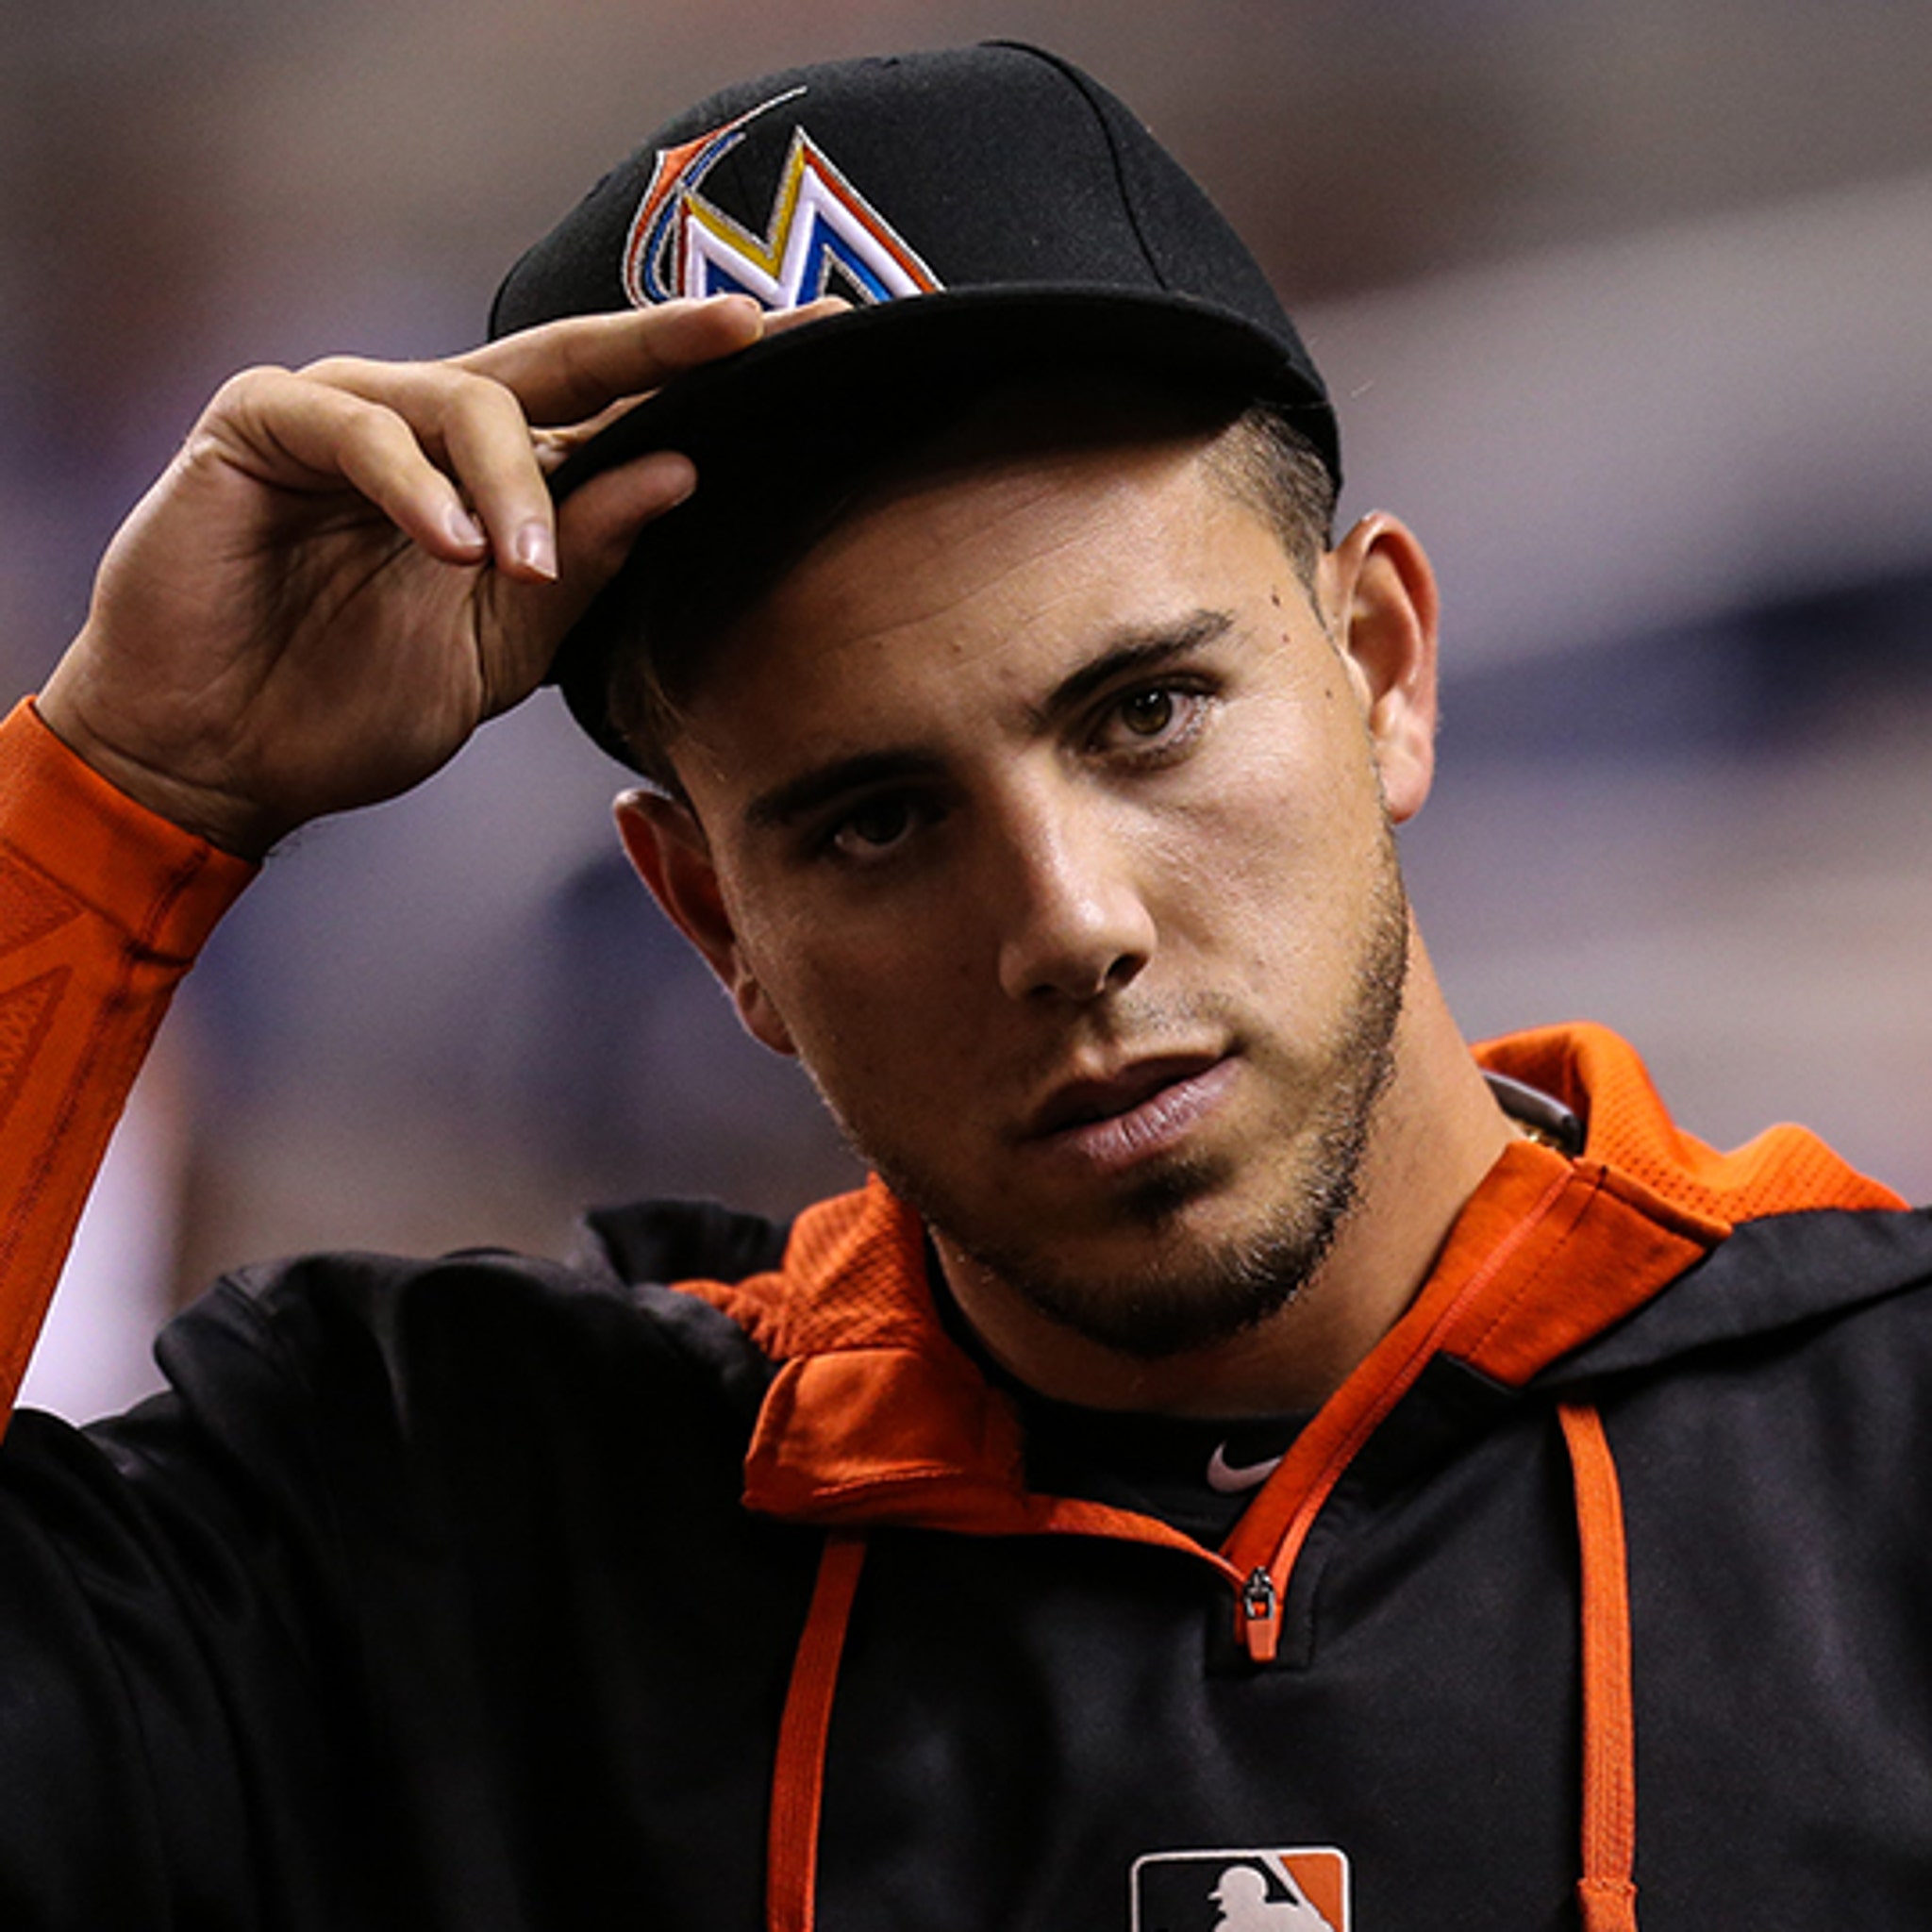 Jose Fernandez Was A Patron At Miami Restaurant And Bar Before Accident –  Hartford Courant